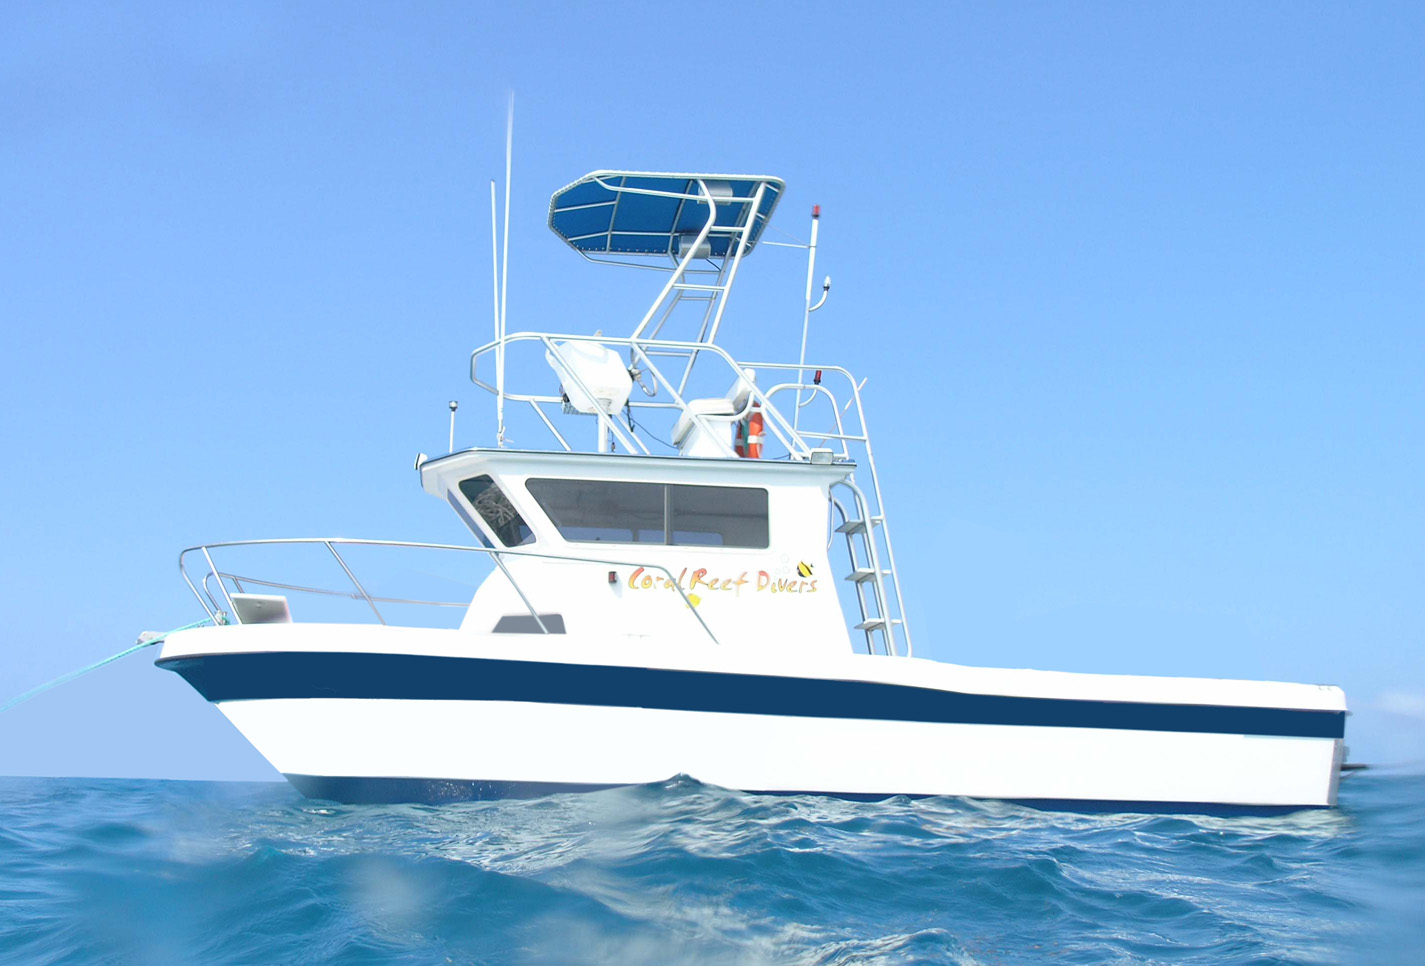 Coral Reef Dive boat